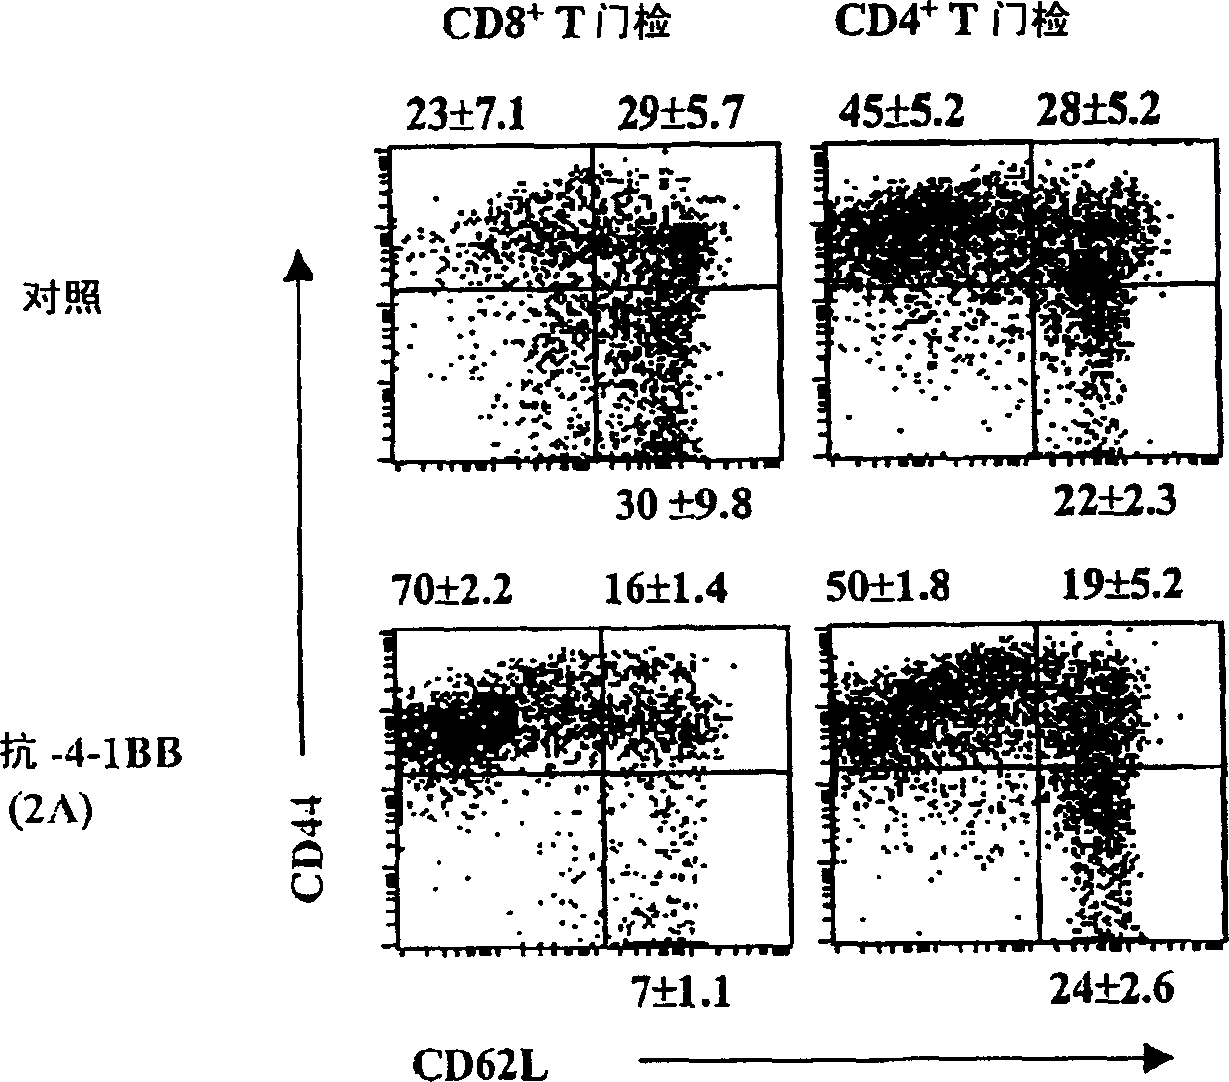 Treatment and prophylaxis with 4-1BB-binding agents